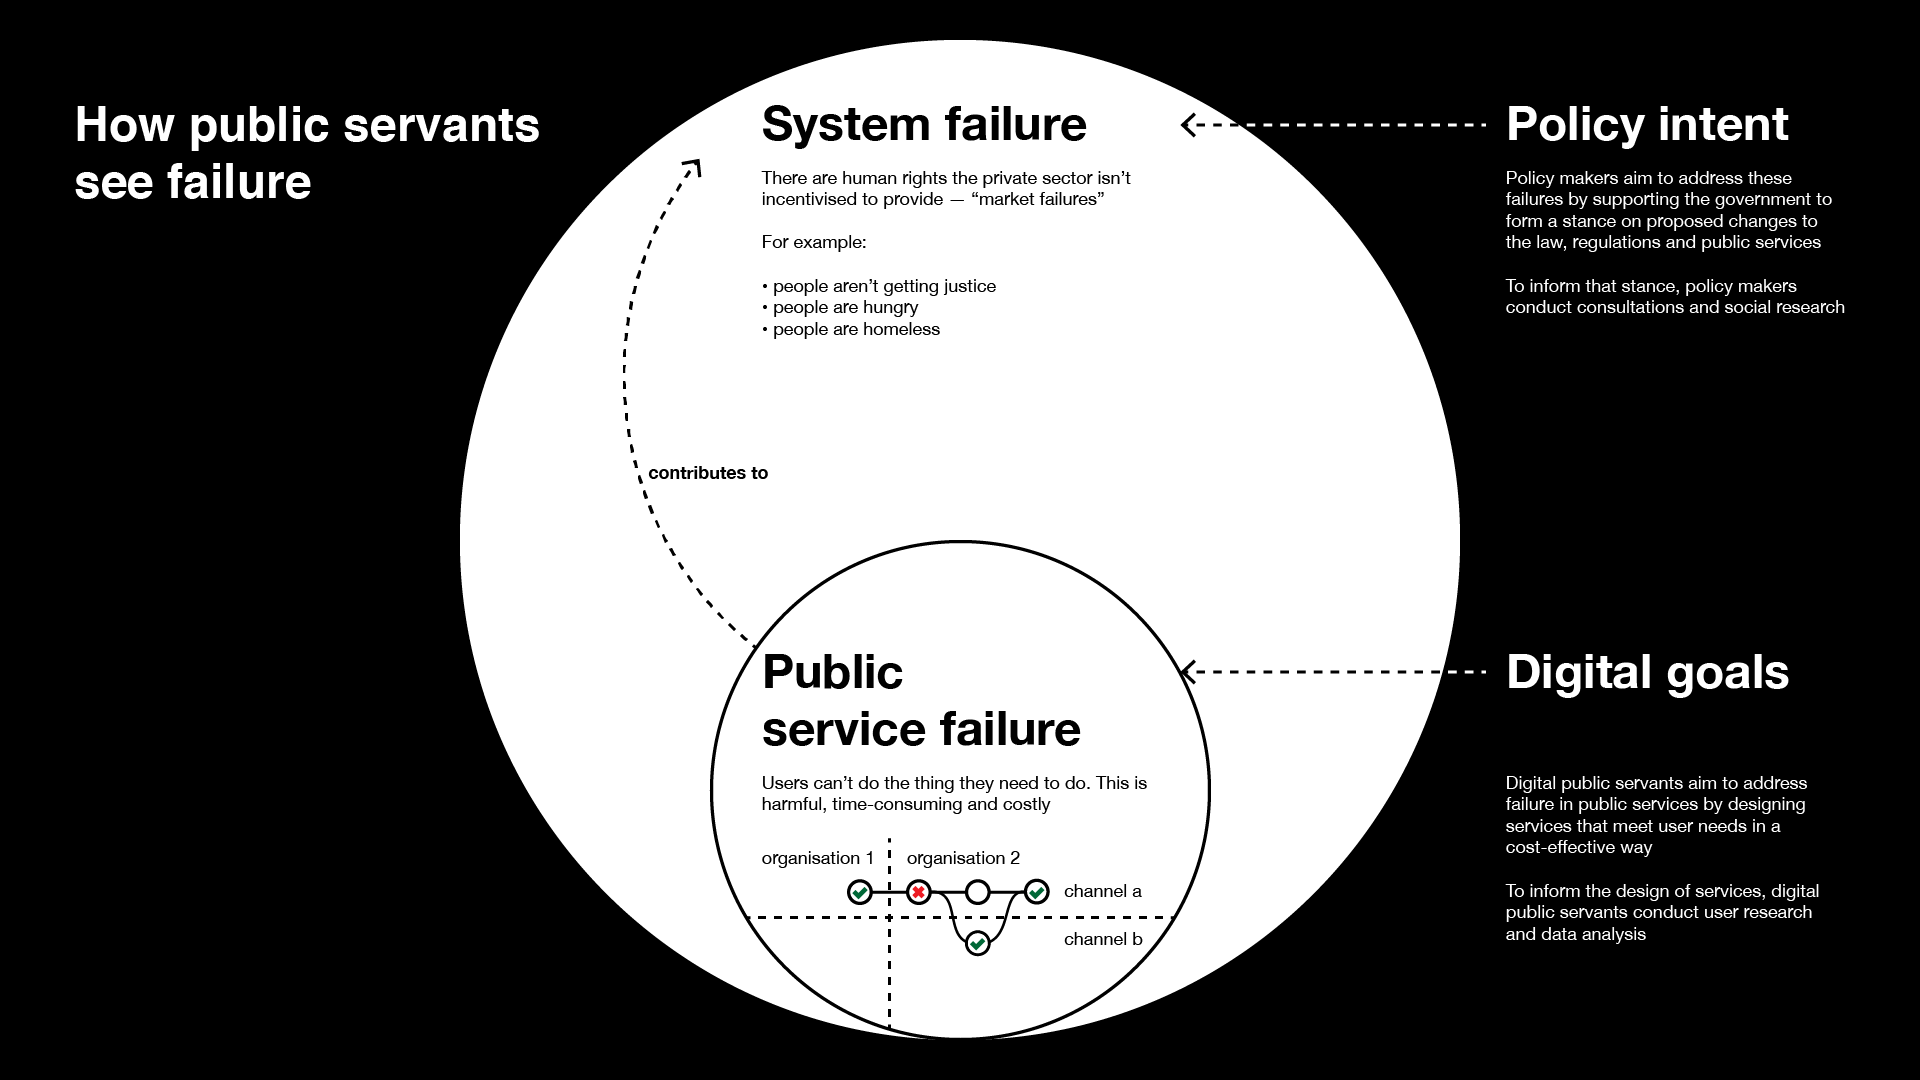 Large circle labelled 'system failure' contains a smaller circle labelled 'public service failure'